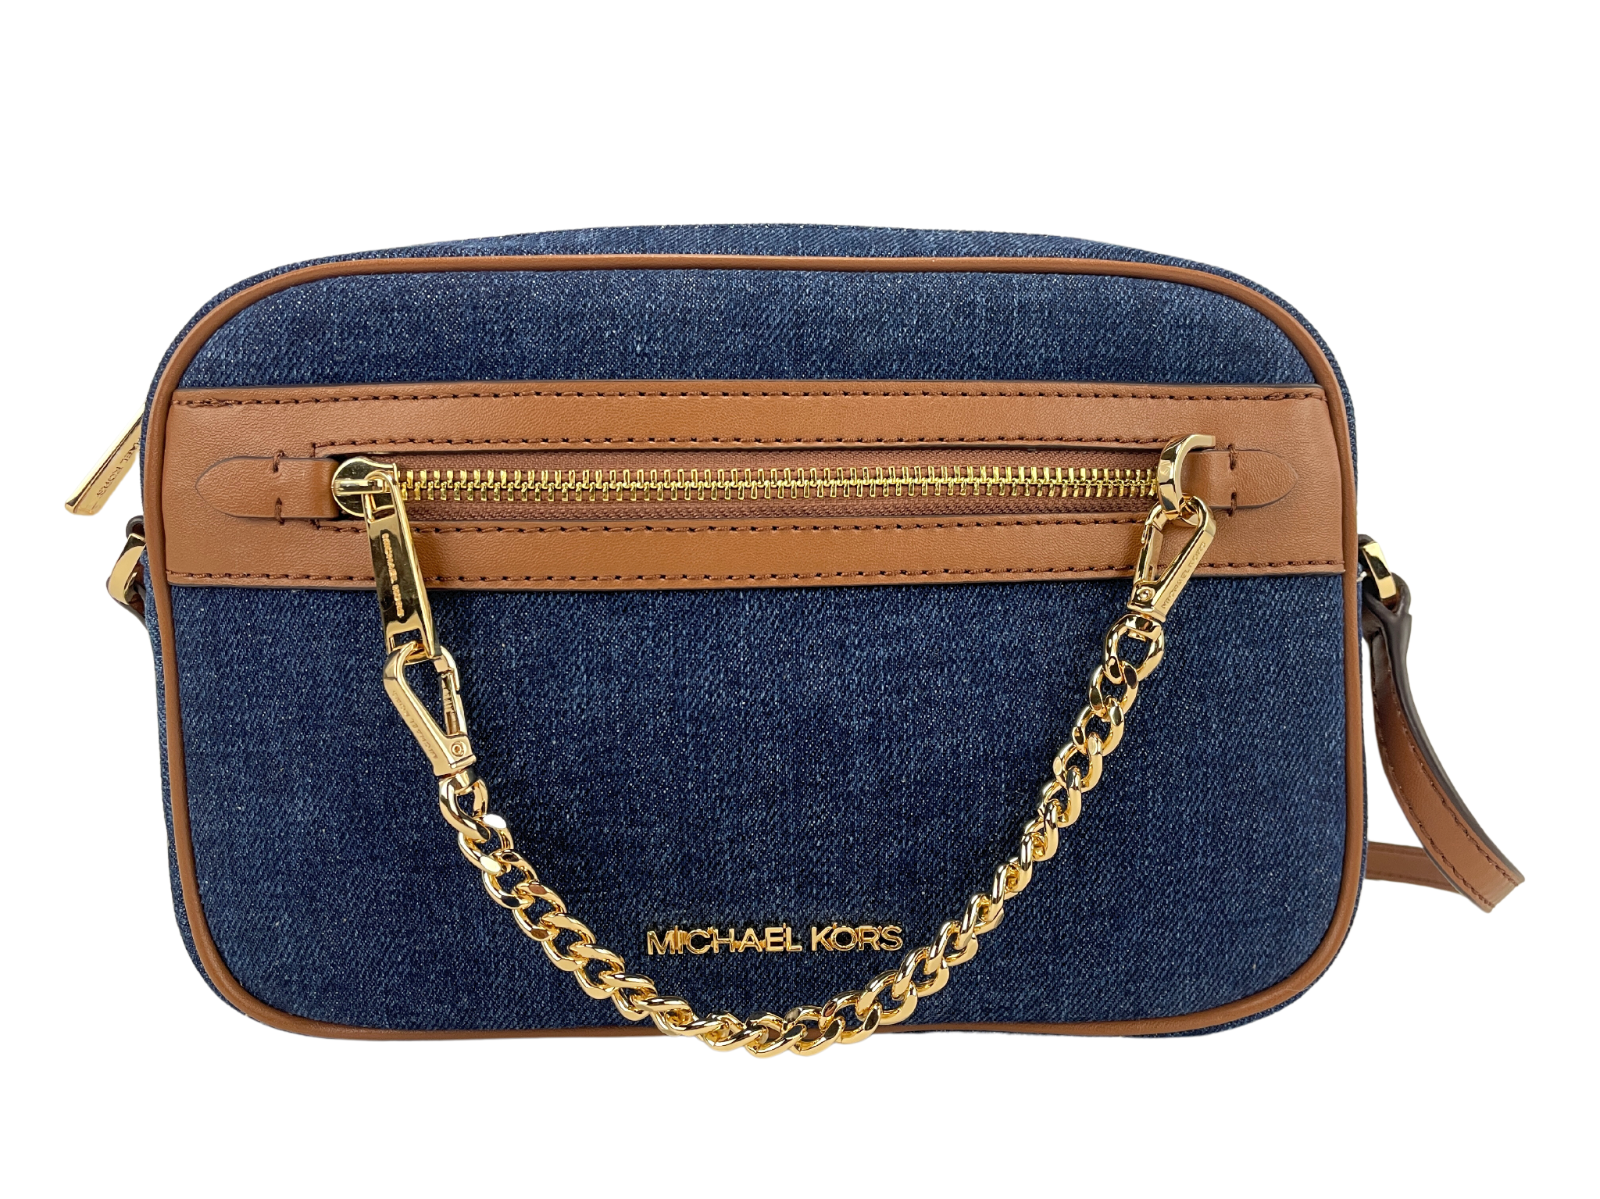 Michael Kors Pale Ocean & Goldtone Jet Set Chain Large Leather Crossbody Bag, Best Price and Reviews